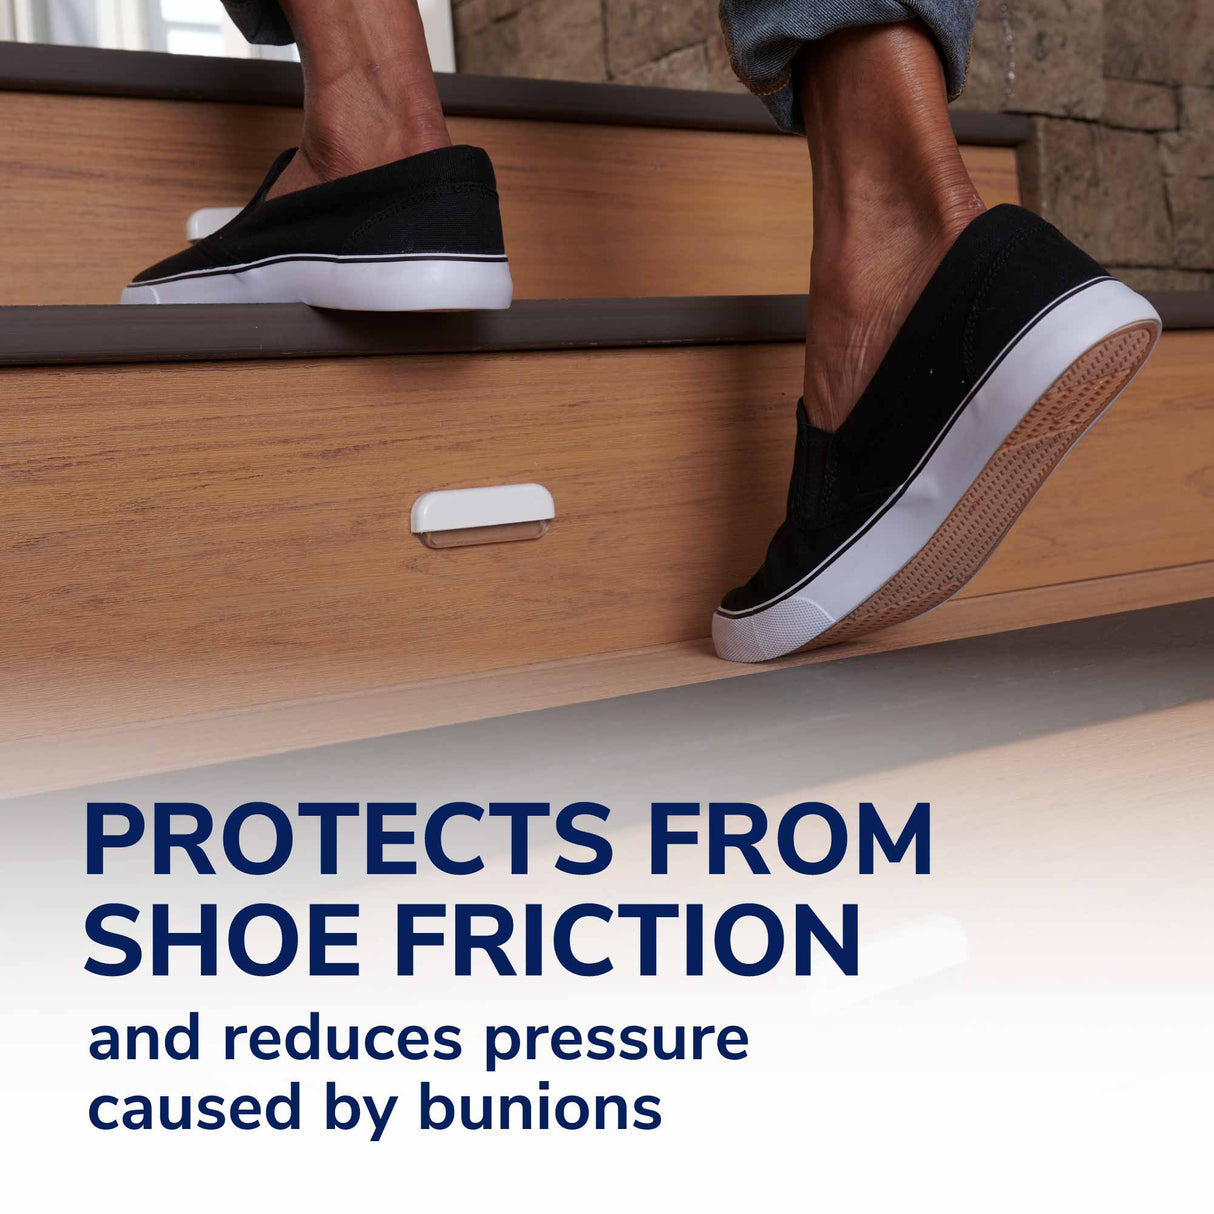 image of protects from shoe friction and reduces pressure caused by bunions